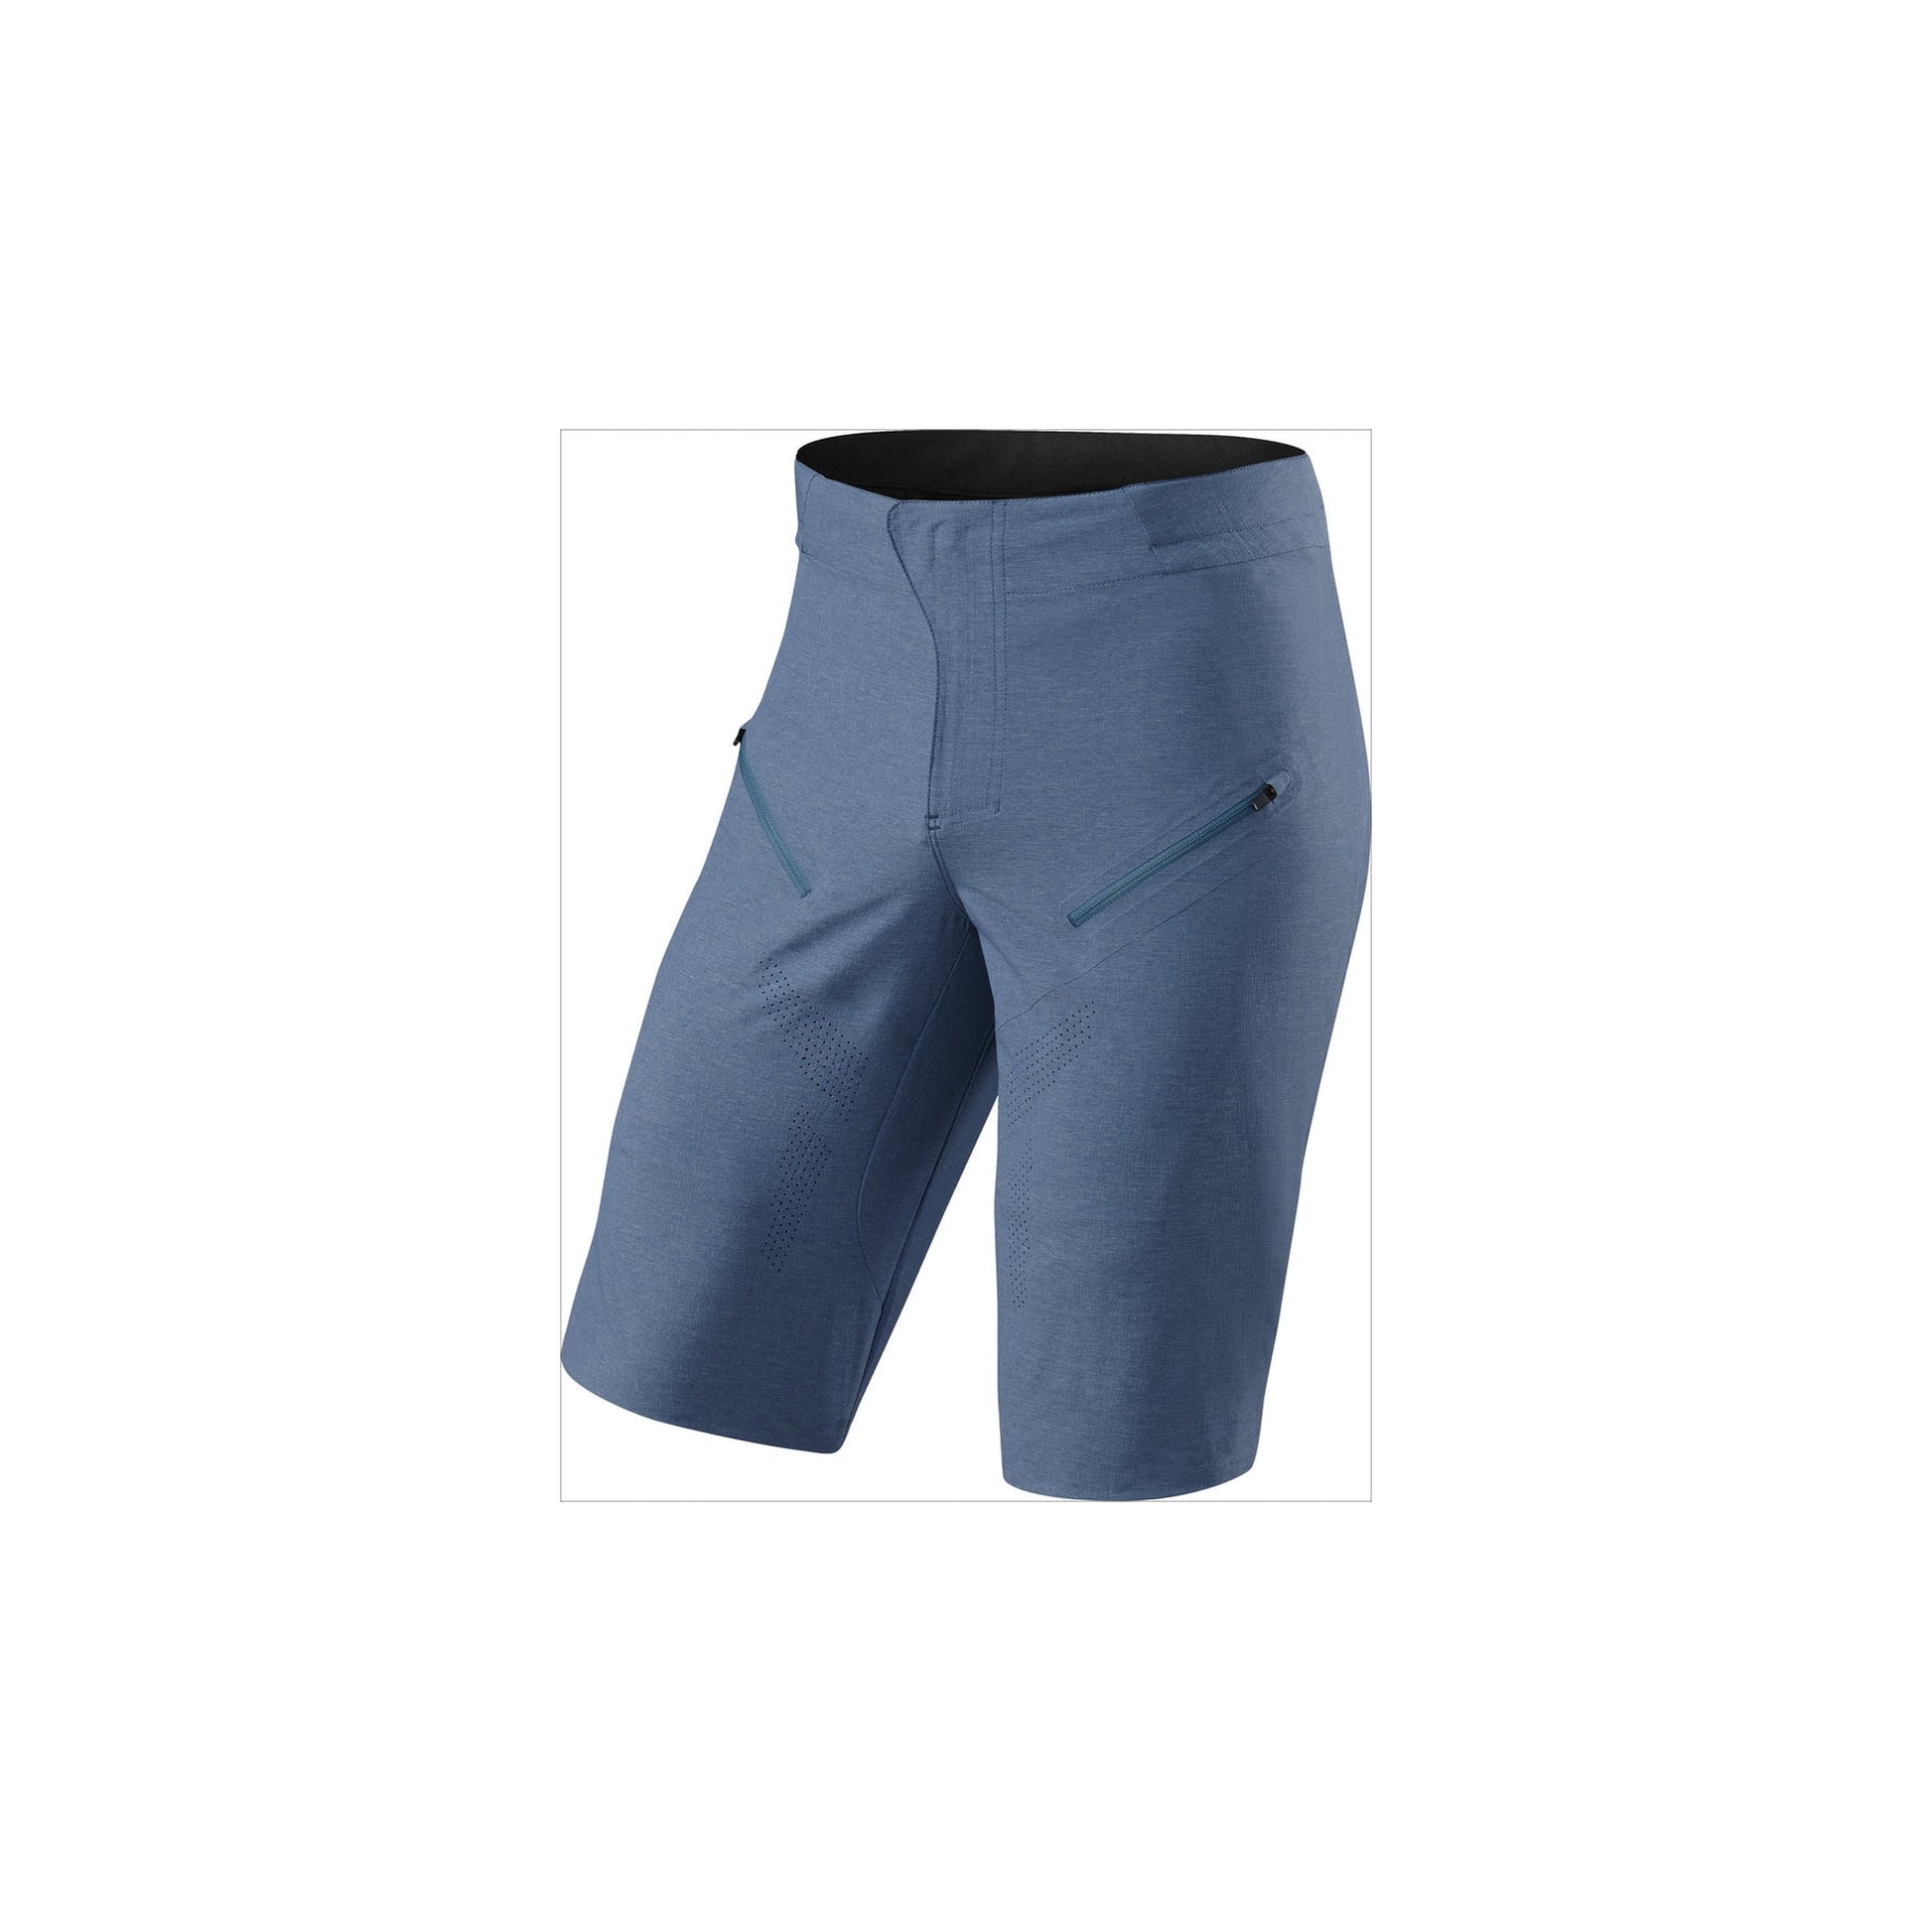 Atlas Pro Shorts-Bells-Cycling-Specialized